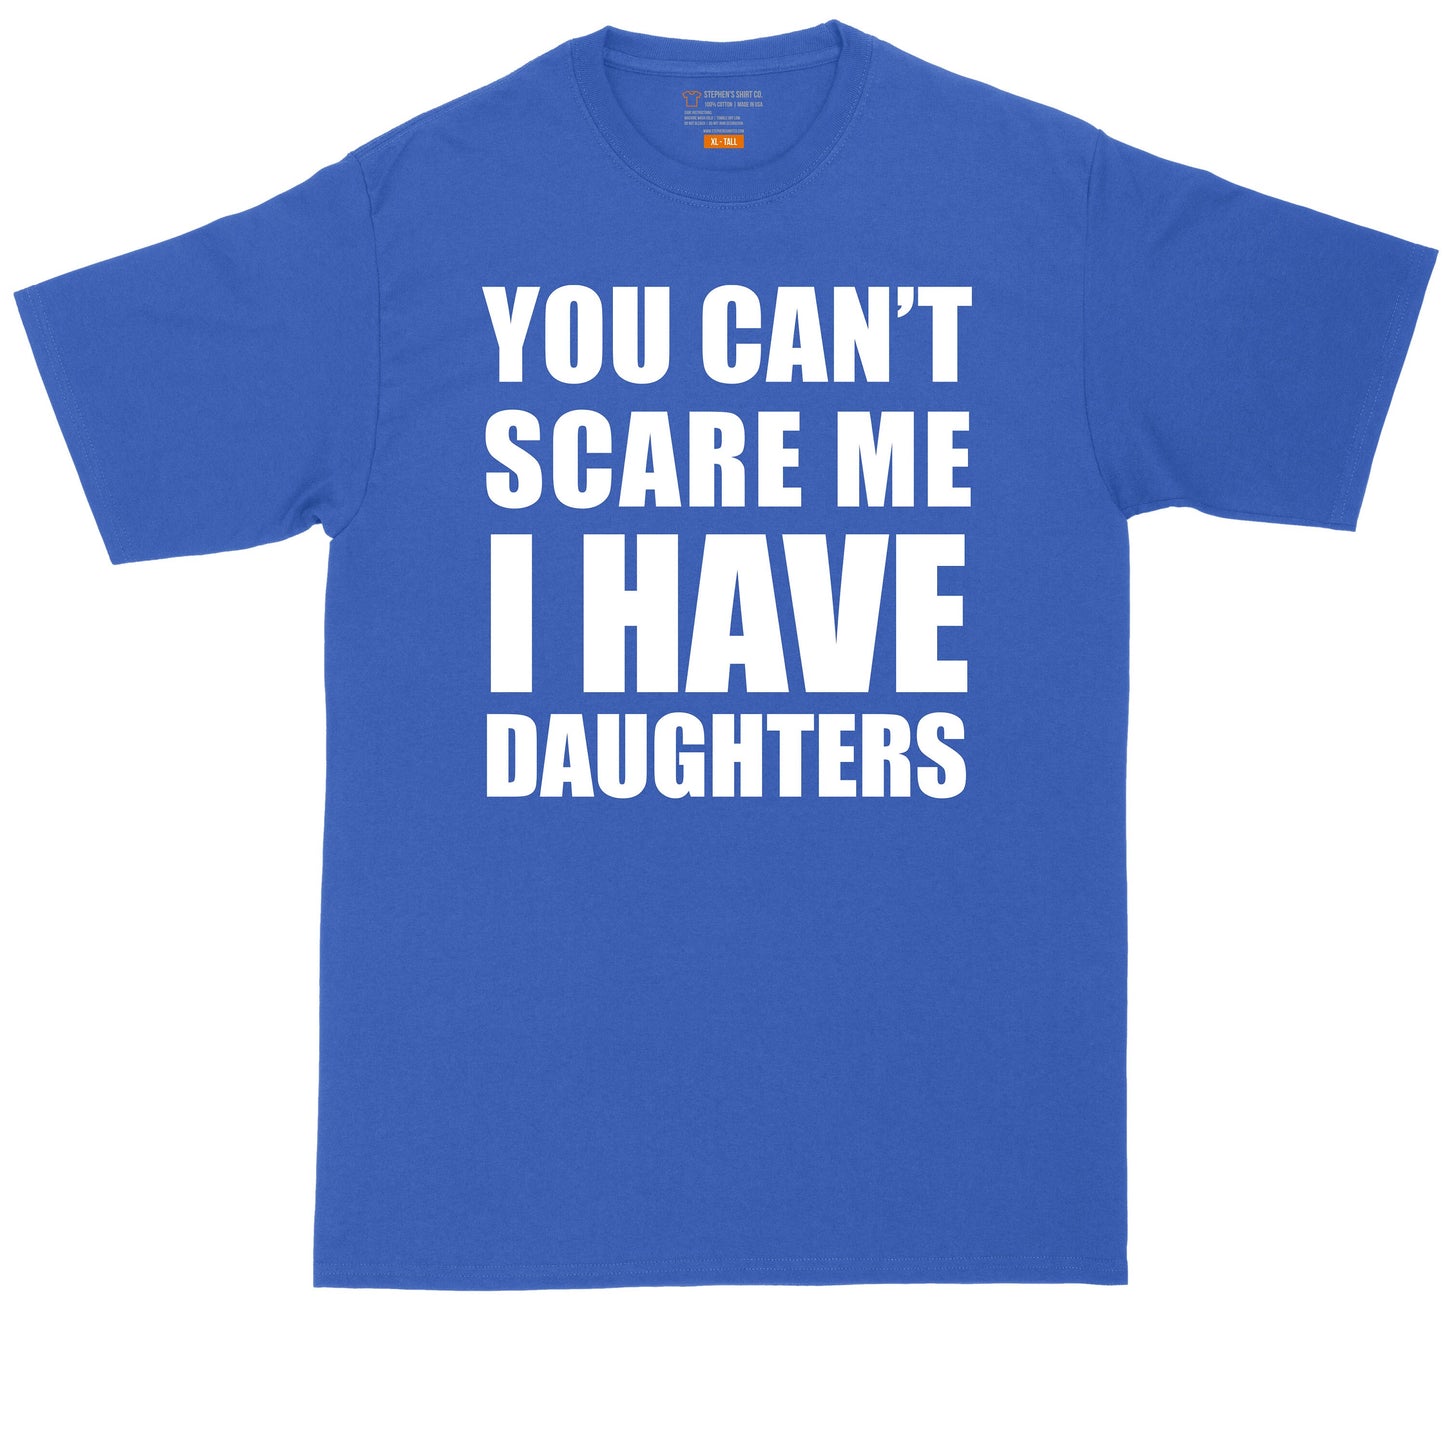 Big and Tall Men | Fathers Day Present | Gift for Him | You Can't Scare Me I Have Daughters